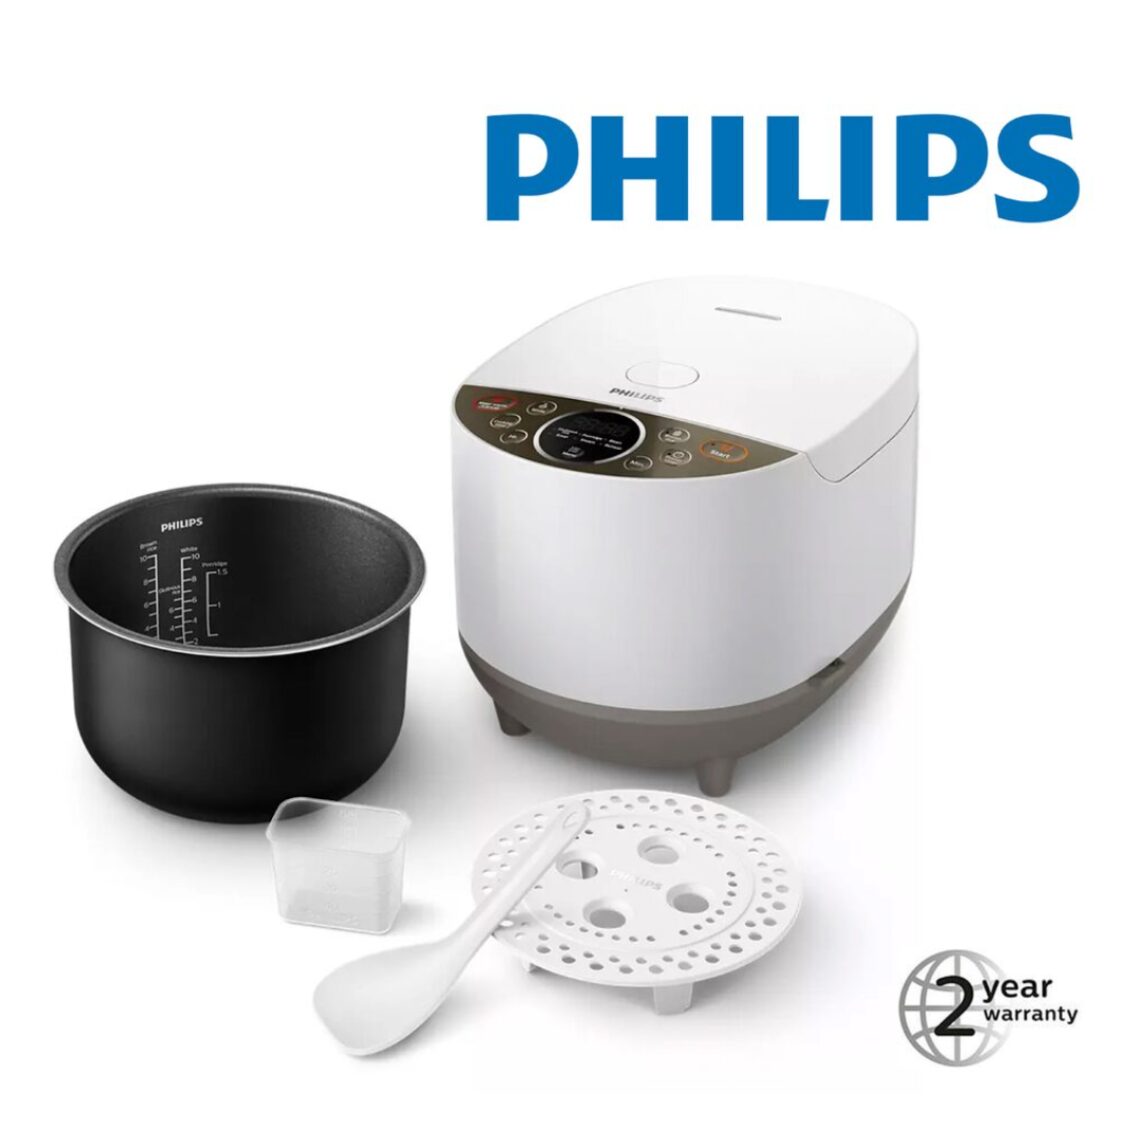 https://media.metro.sg/ProductImages/90d5a525-9181-4e20-a302-6a265218b9e0/1/std/philips-daily-collection-fuzzy-logic-rice-cooker-18l-hd451563-230731111349.jpg